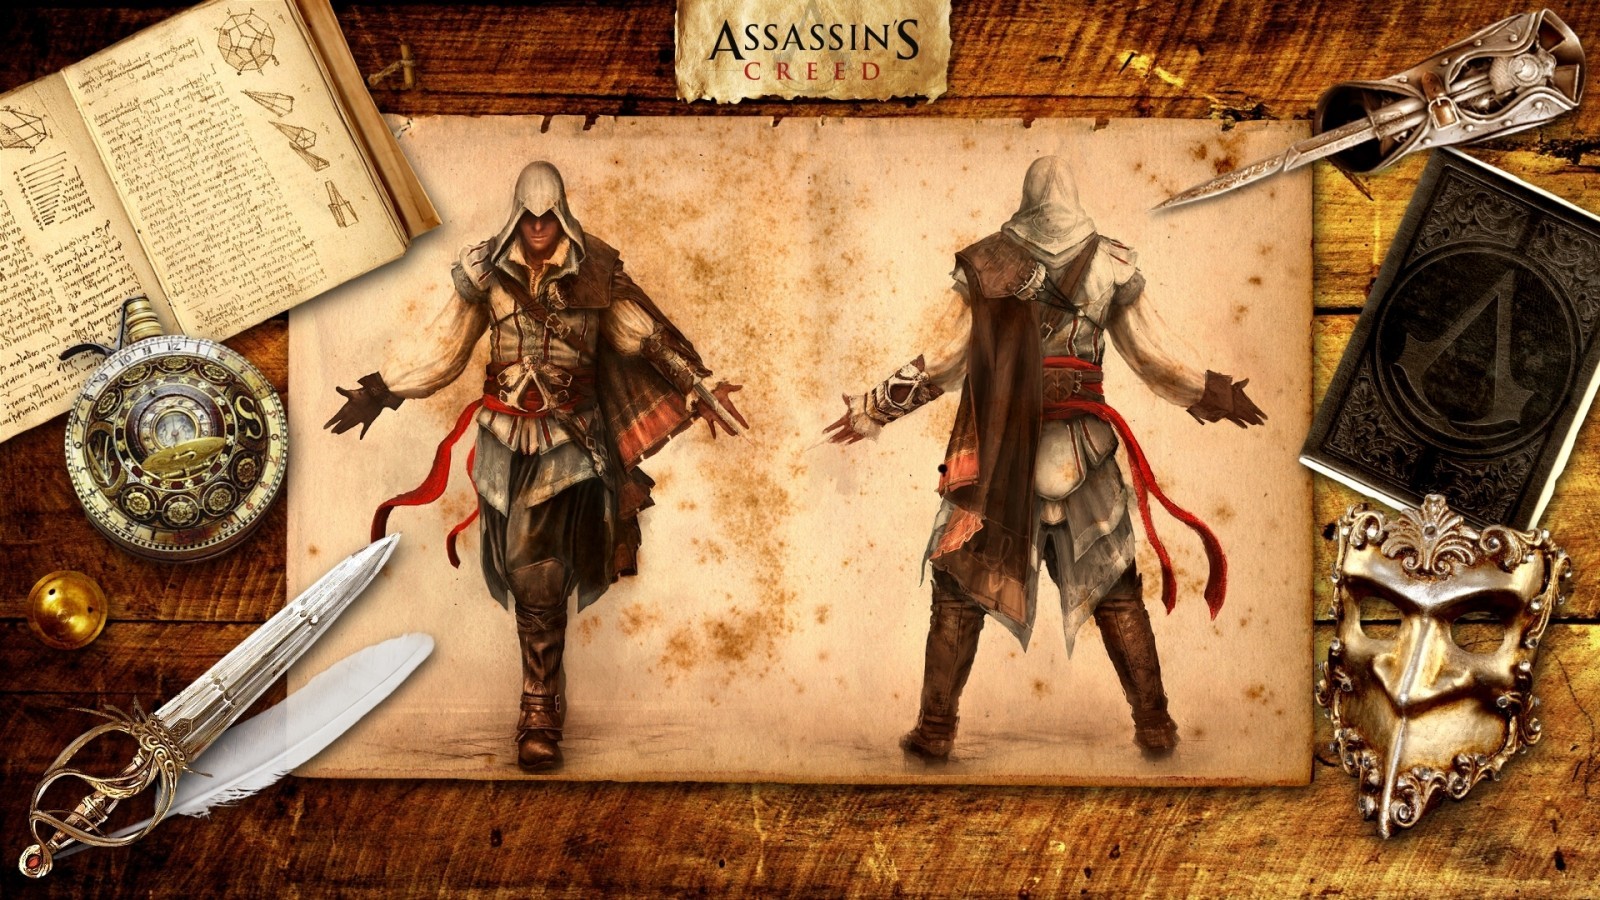 General 1600x900 Assassin's Creed II Assassin's Creed video games video game art video game men PC gaming